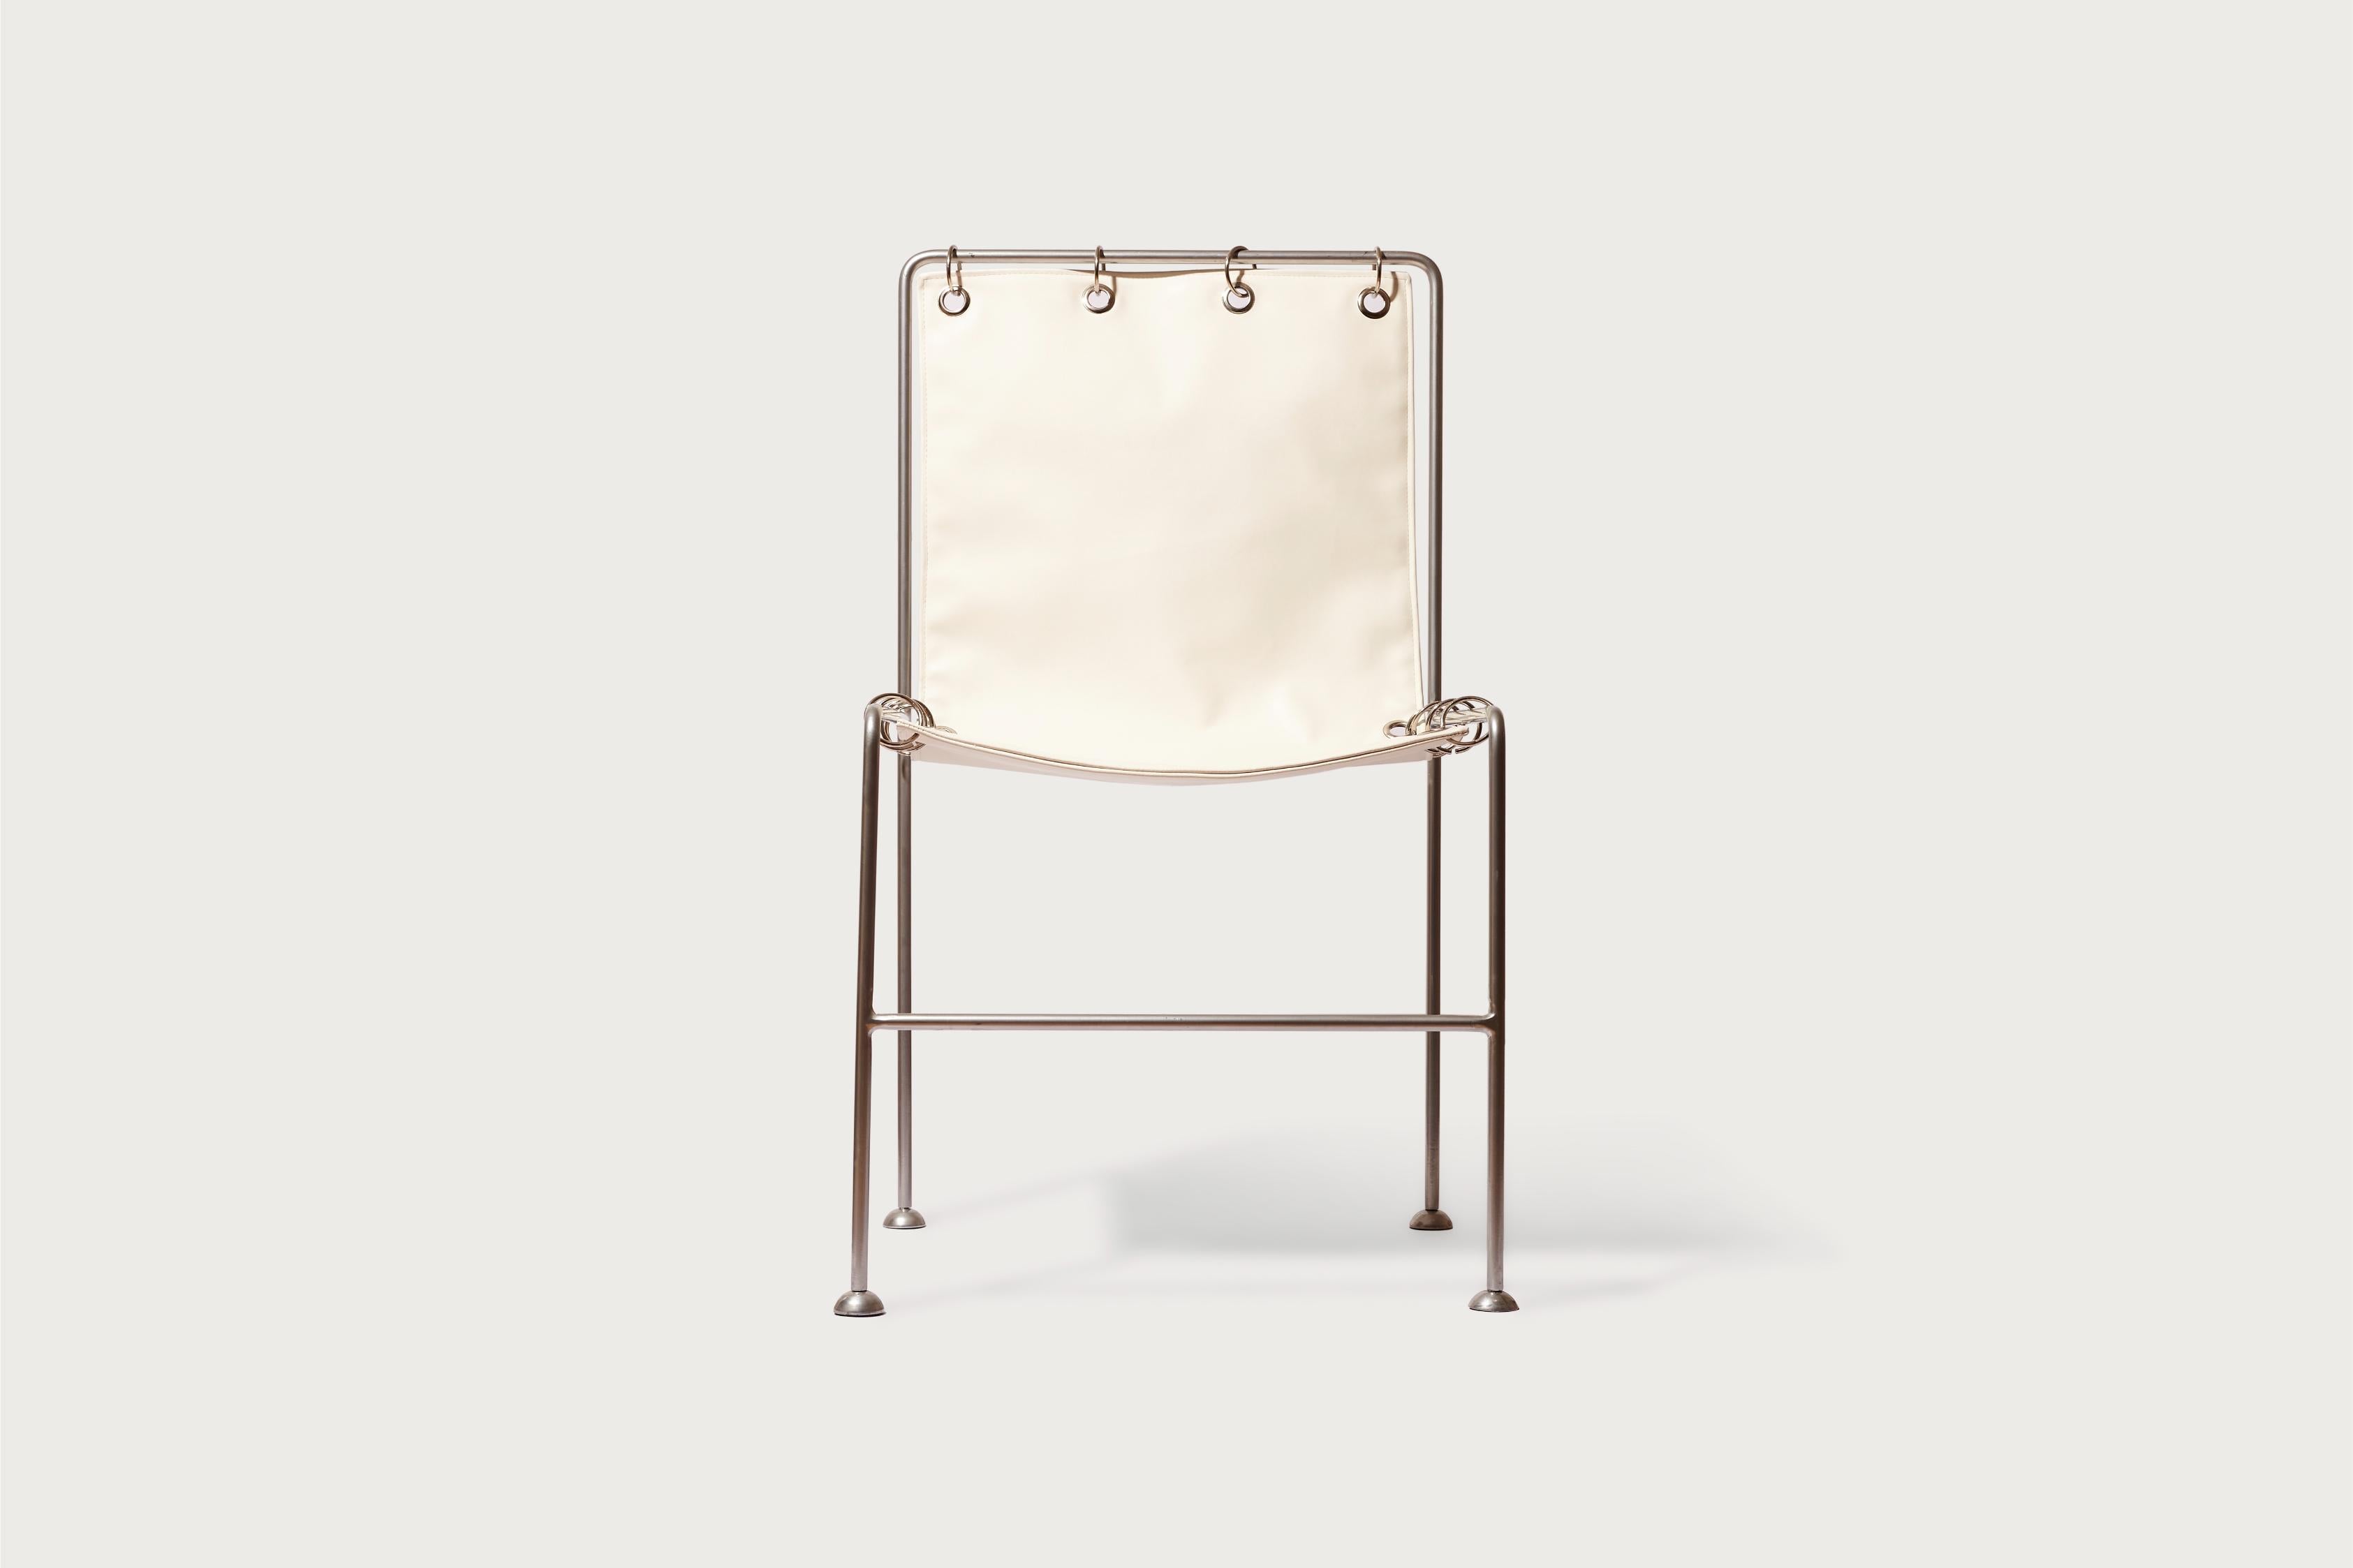 Institution chair by Panorammma
Materials: steel, nickel, white leather.
Dimensions: 90 x 49.5 x 49.5 cm

Panorammma is a furniture design atelier based in Mexico City that seeks to redefine our relation to functional objects through